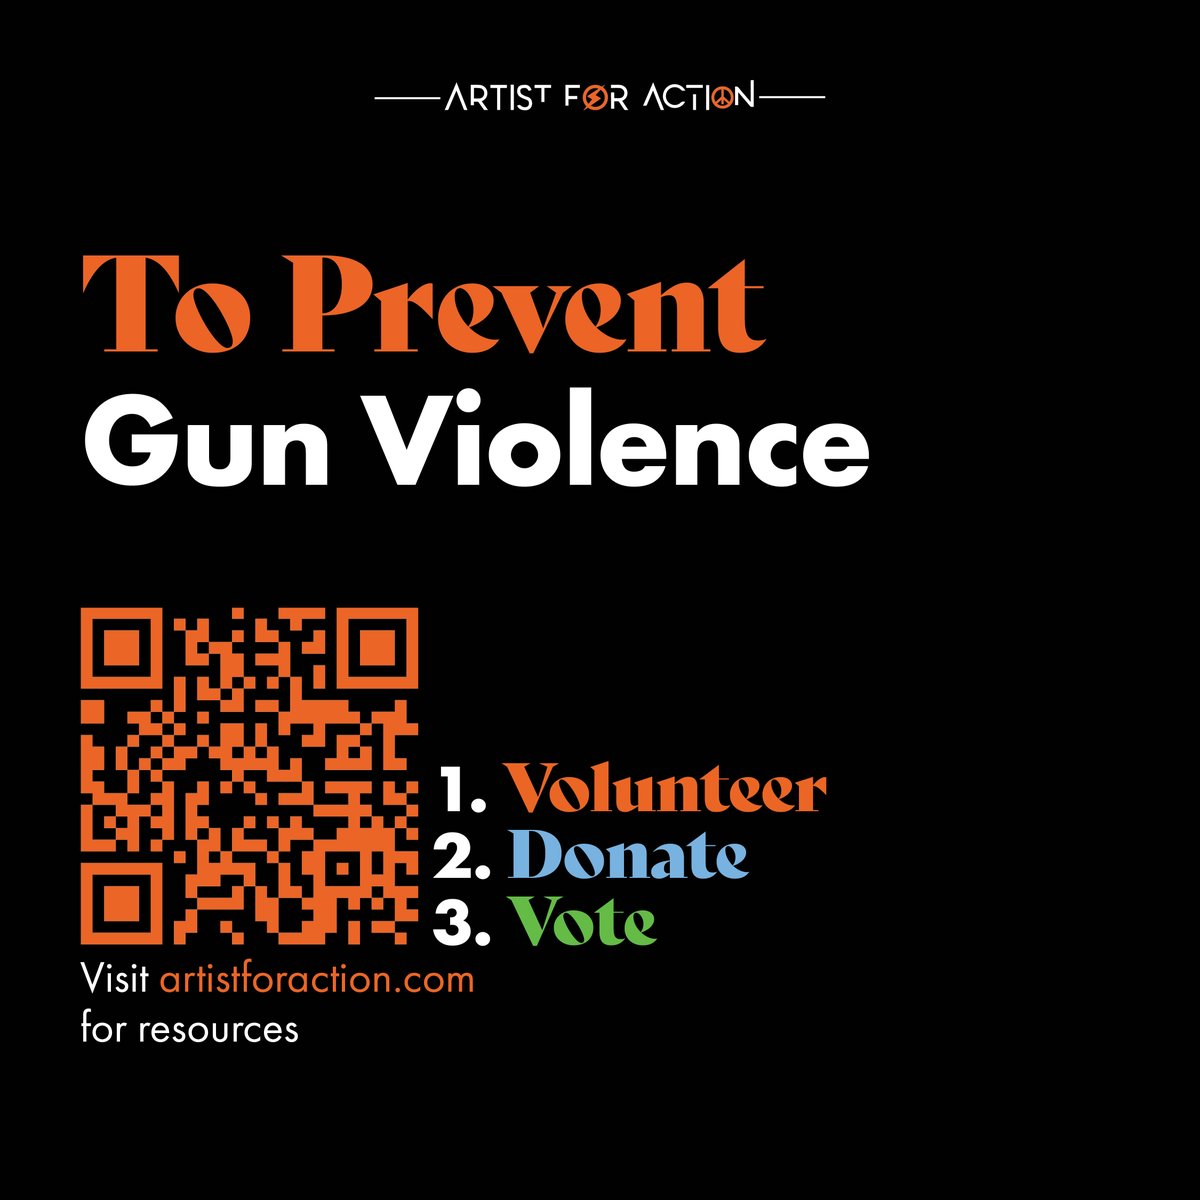 I am an @afaventures - #ArtistForAction. We are a coalition of musicians who have come together to take on the gun violence epidemic and make our communities safer. Get involved now at artistforaction.com!